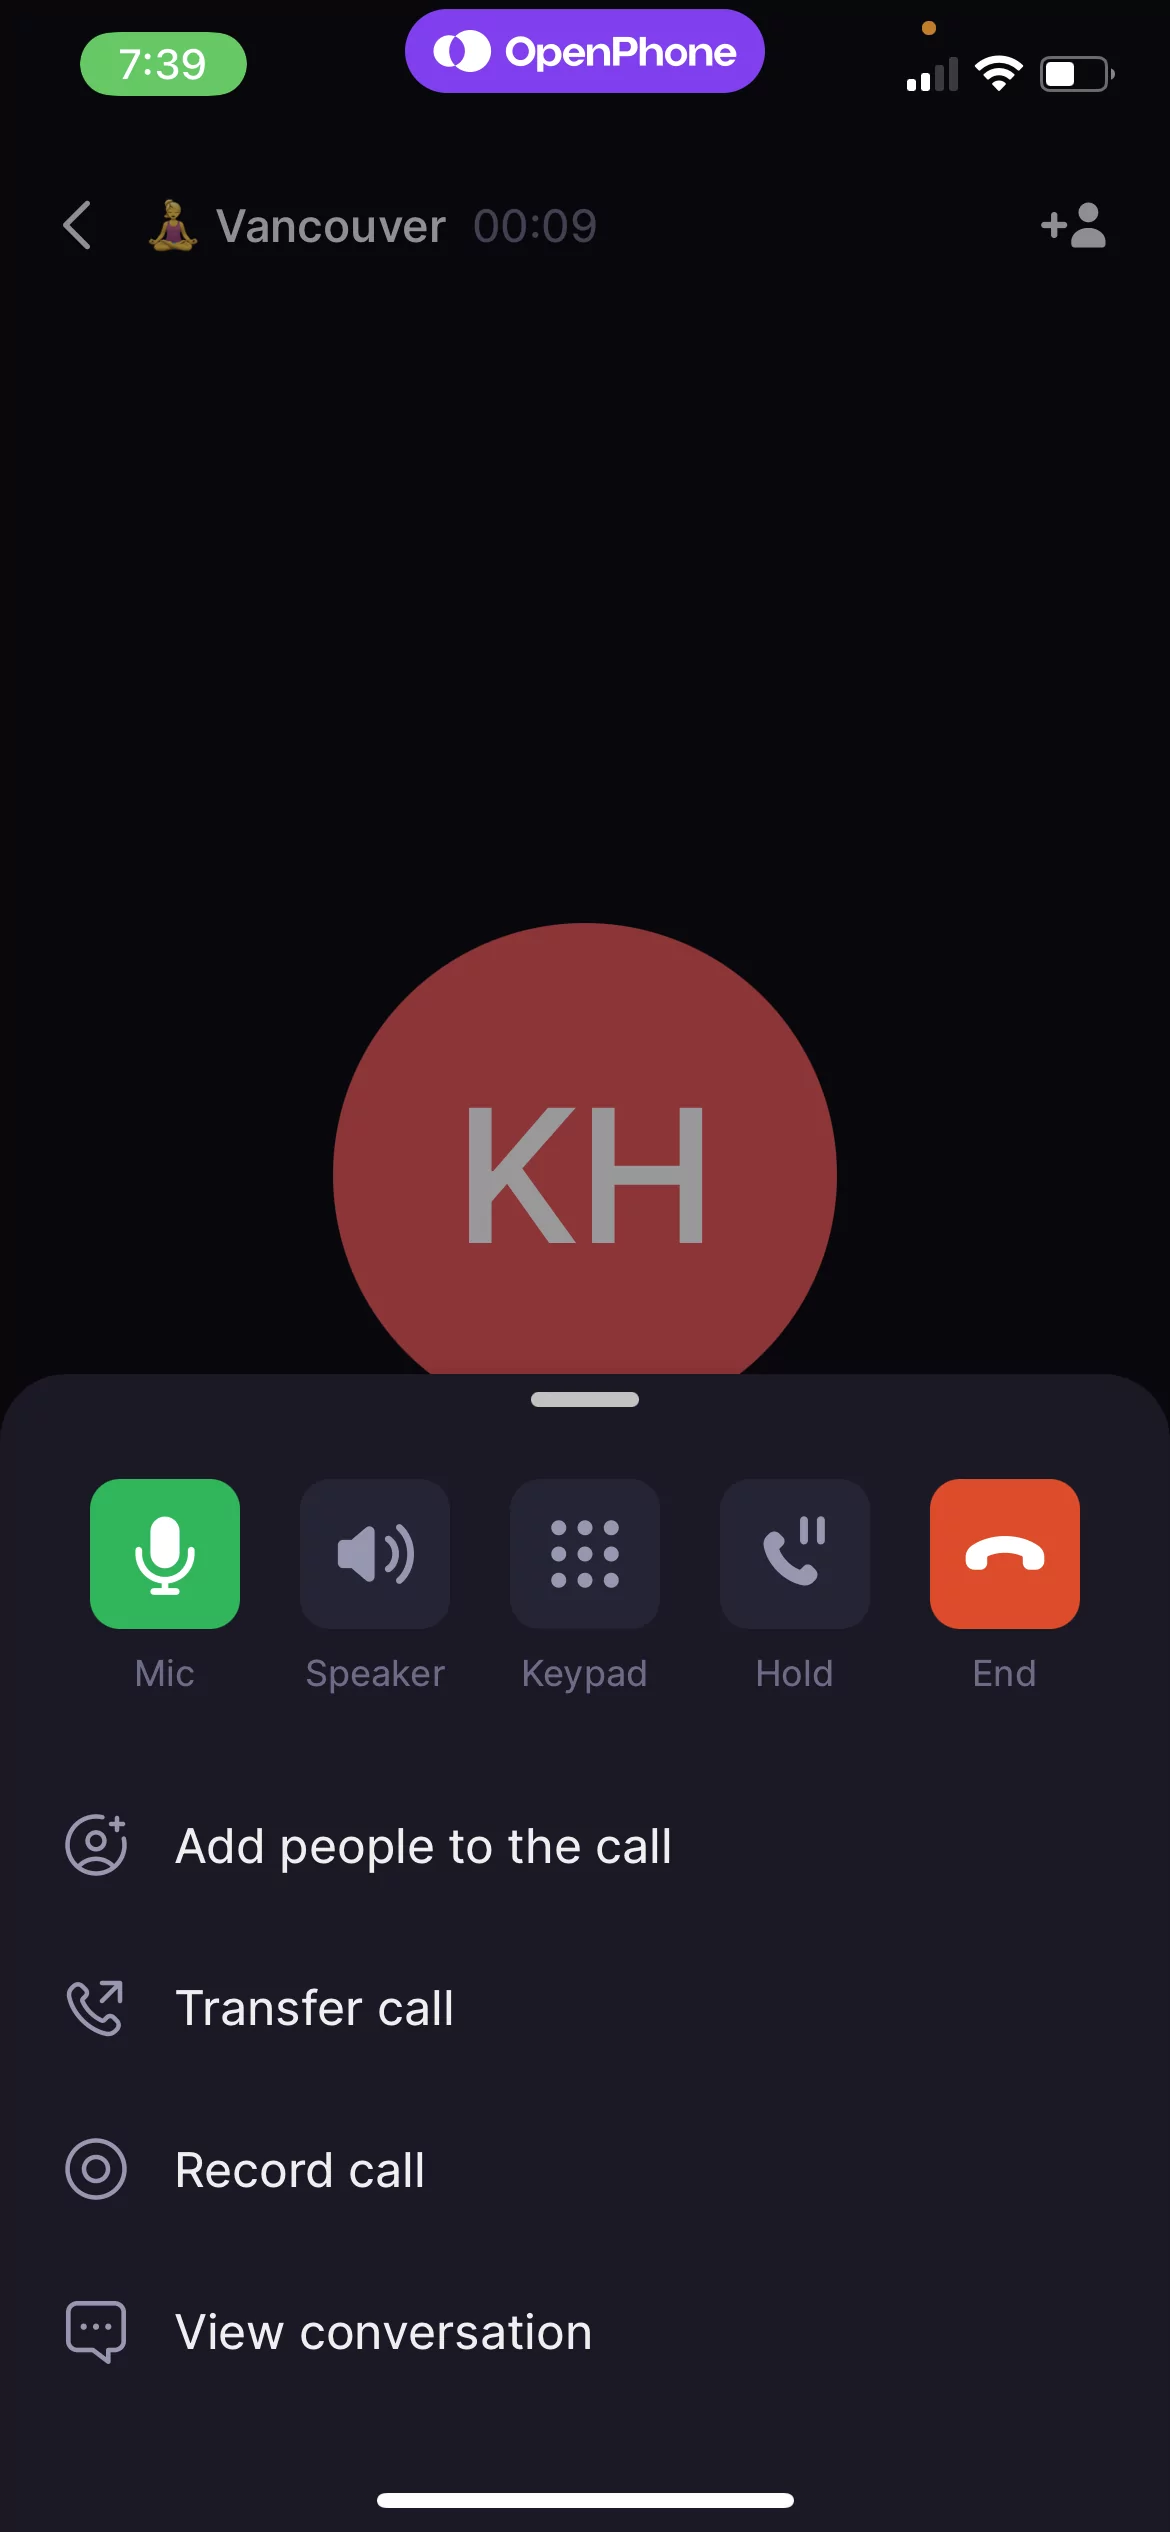 OpenPhone record call option on mobile